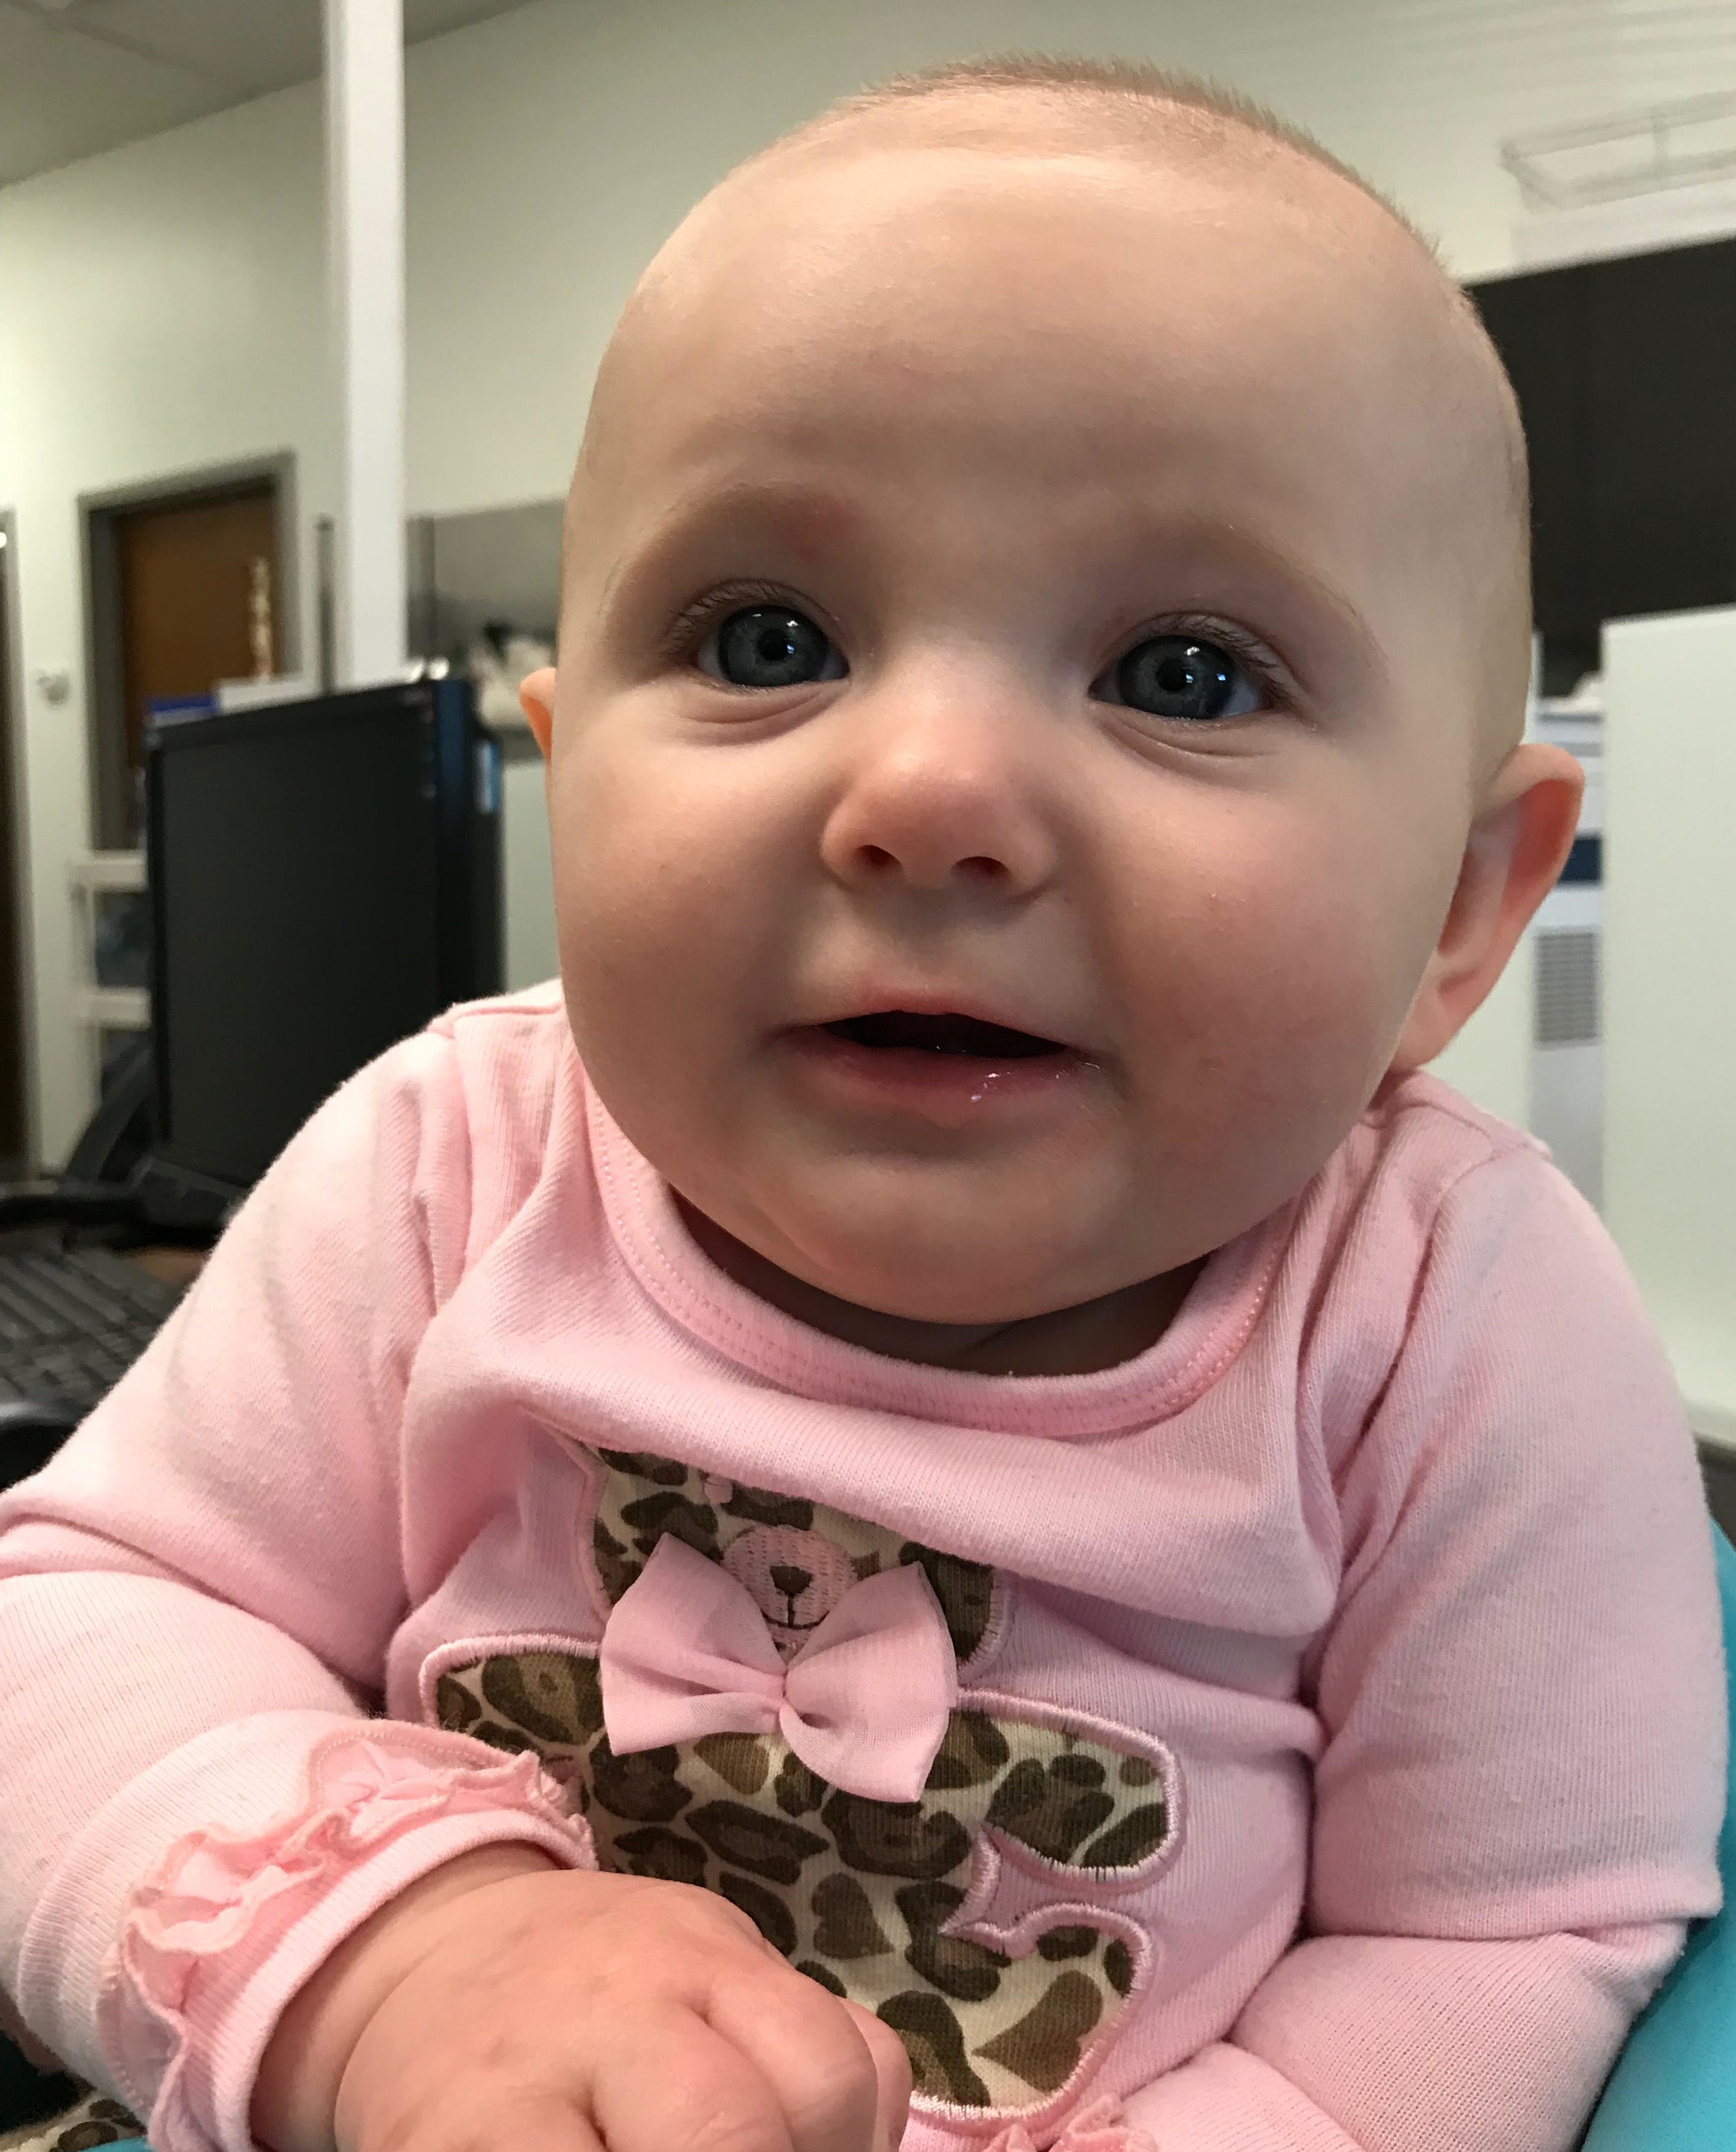 My daughter, the newest office baby, at 4 months old.